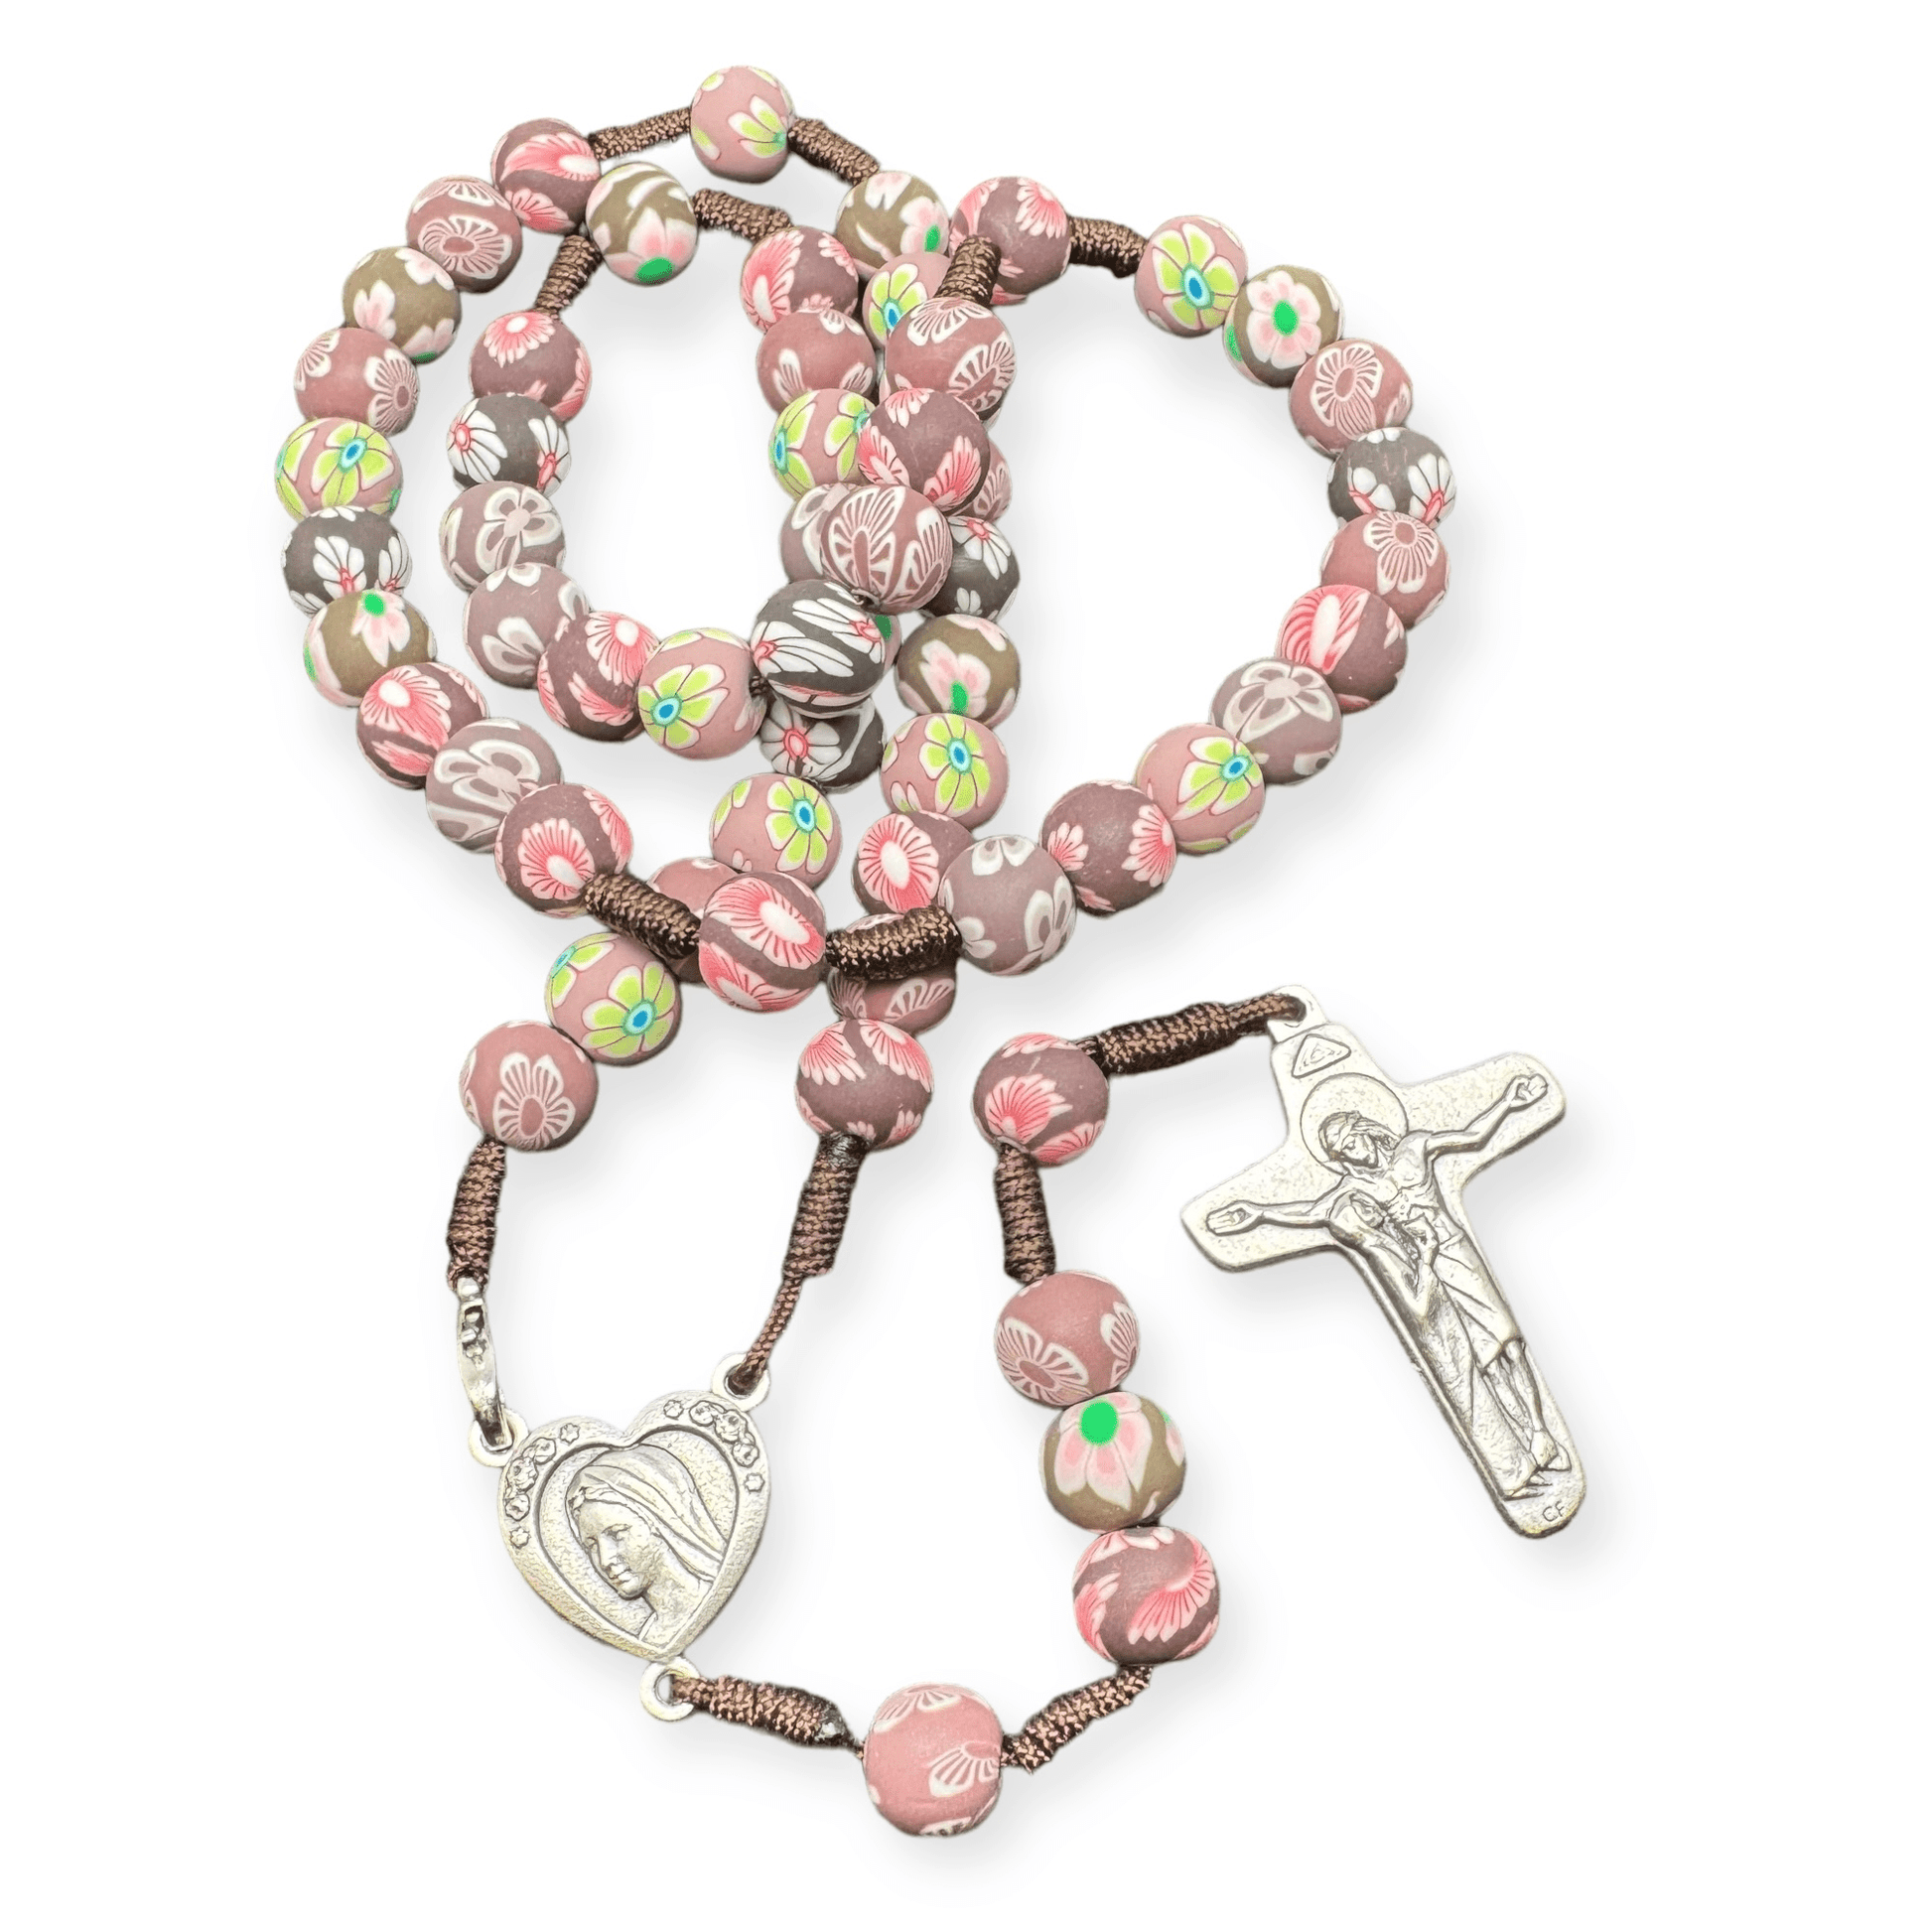 Catholically Rosaries Wonderful Rosary Hand Made By the Nuns of Medjugorje - Blessed By Pope